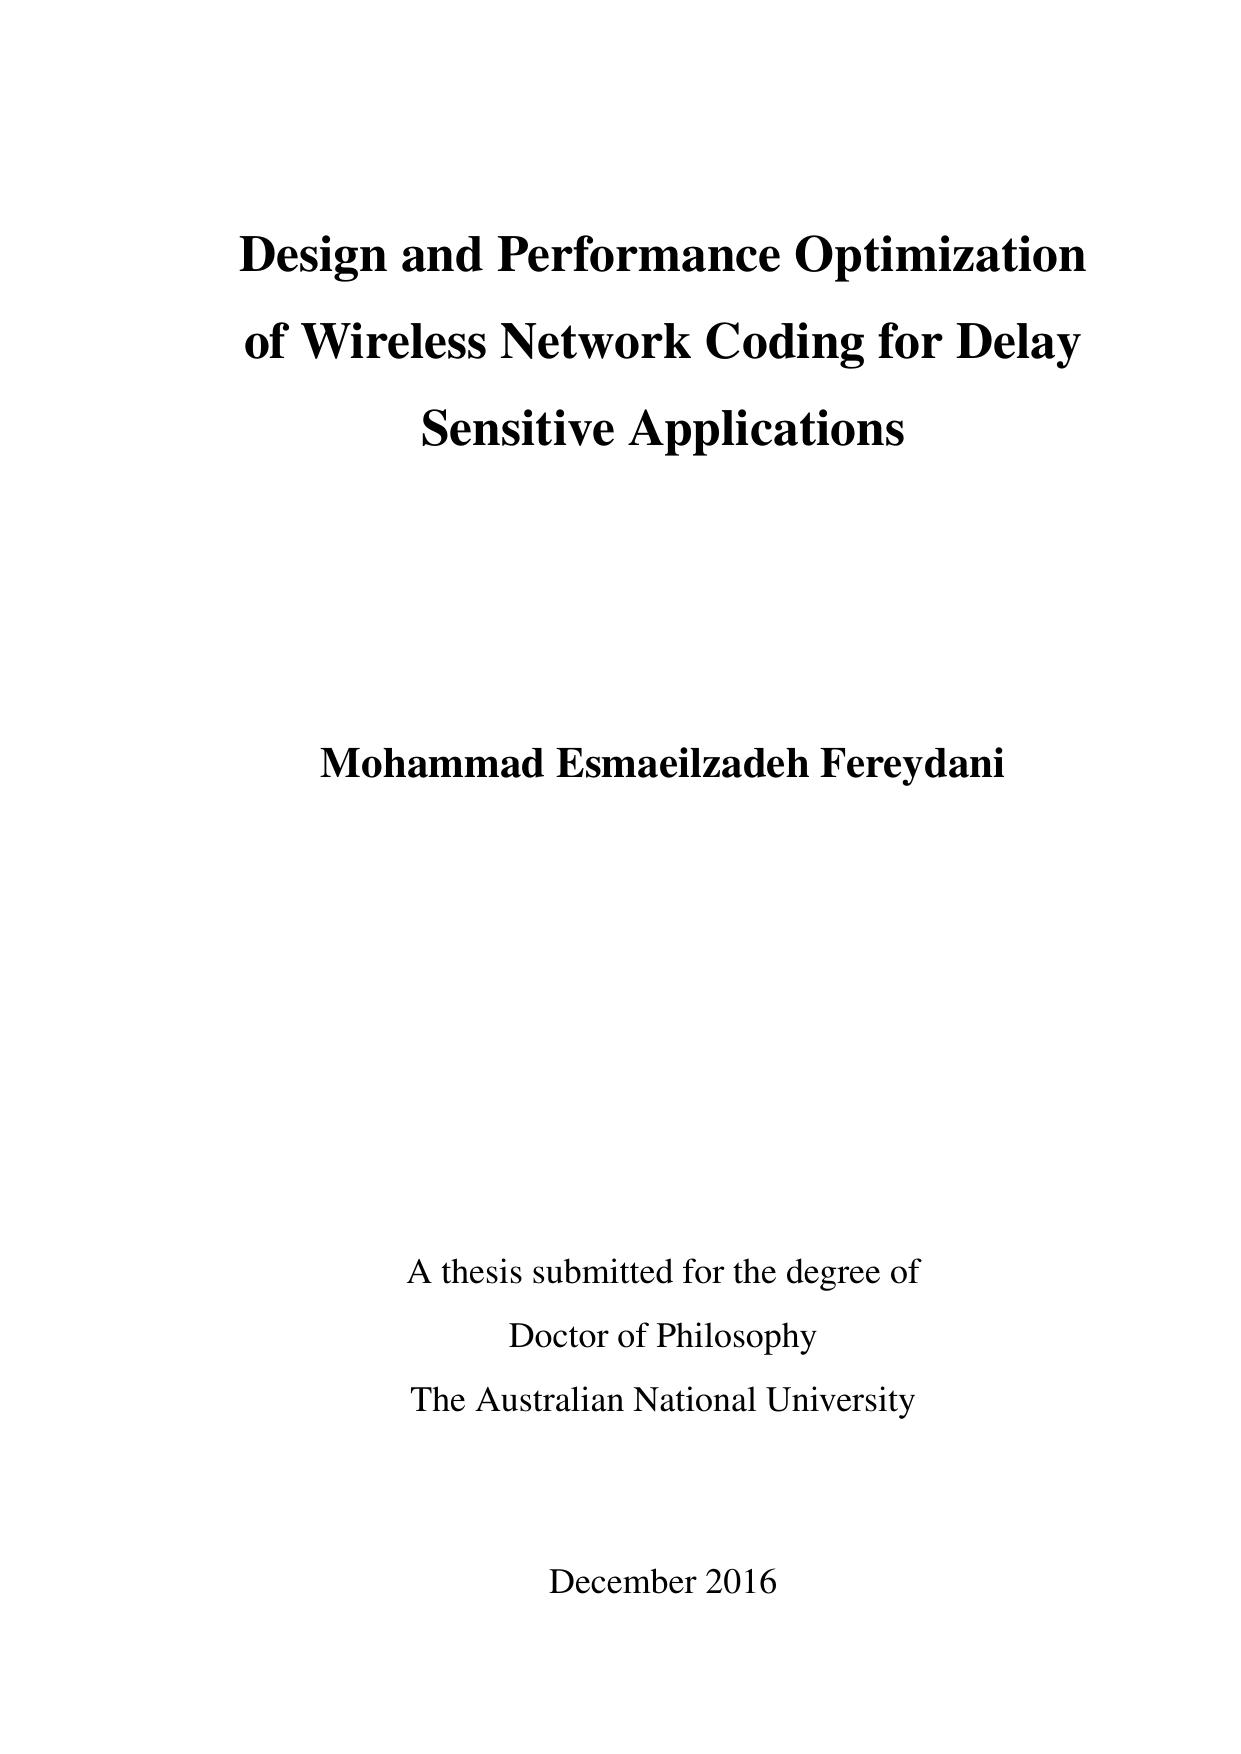 Design and Performance Optimization of Wireless Network Coding for Delay Sensitive Applications 2016